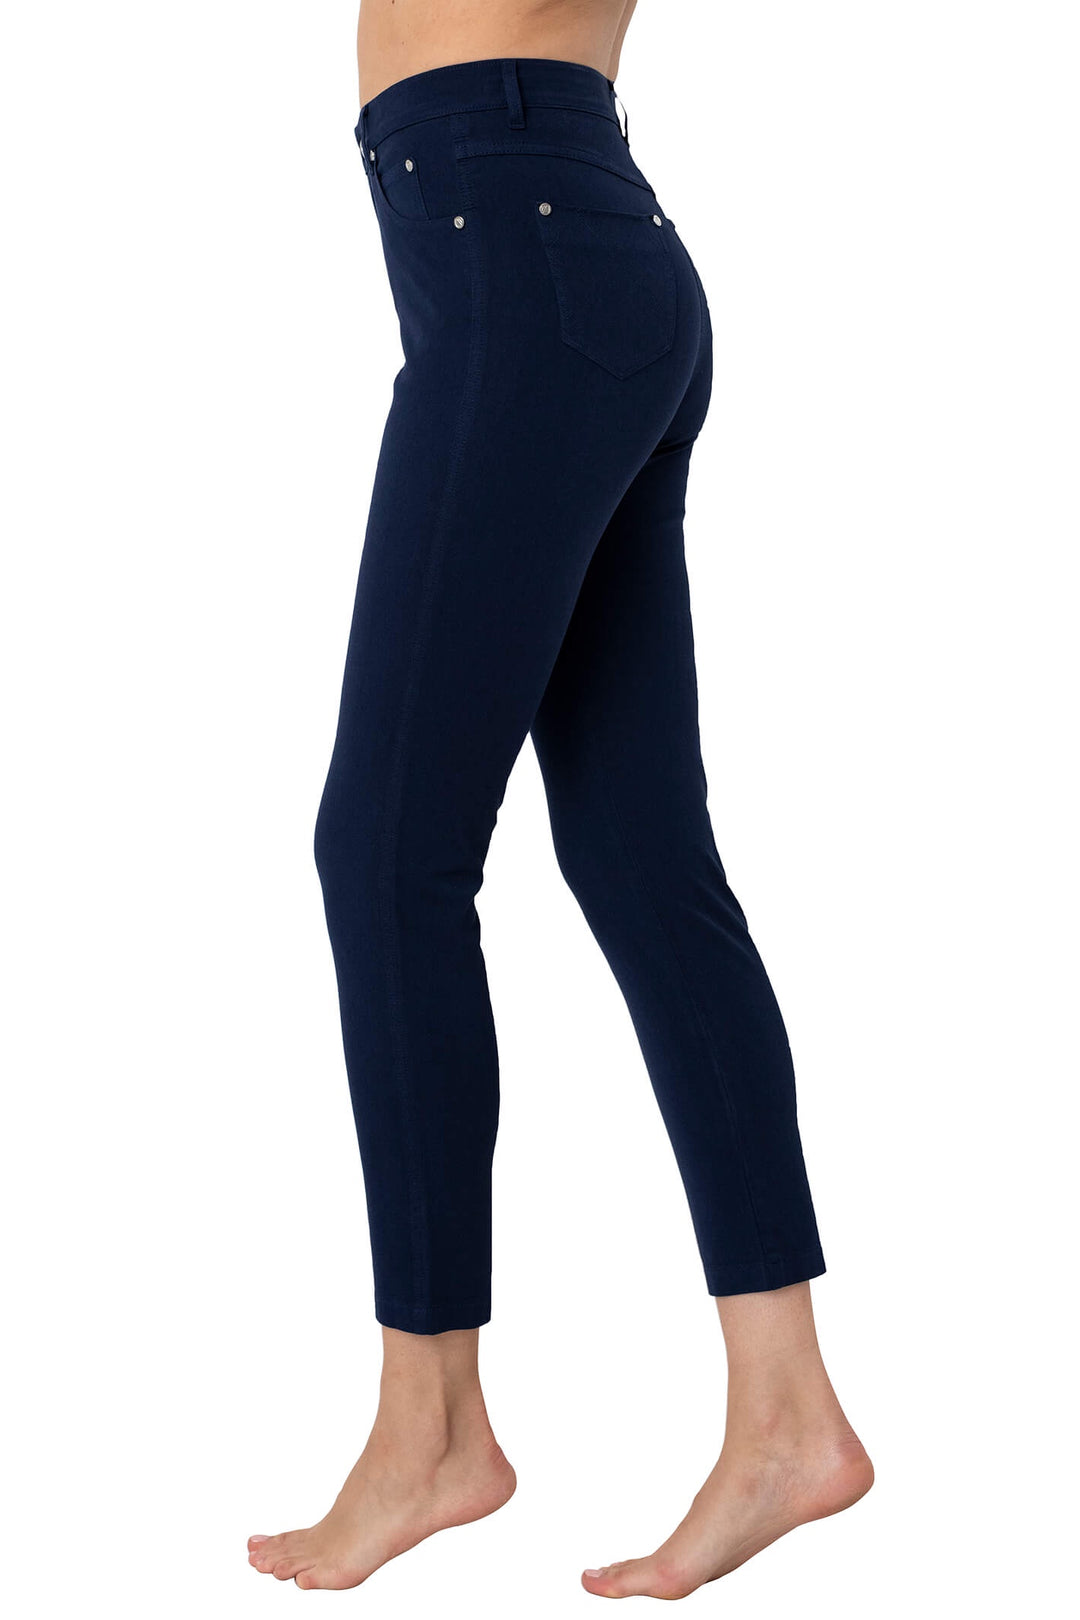 Marble 2400 103 Navy High Waisted Regular Jeans - Dotique